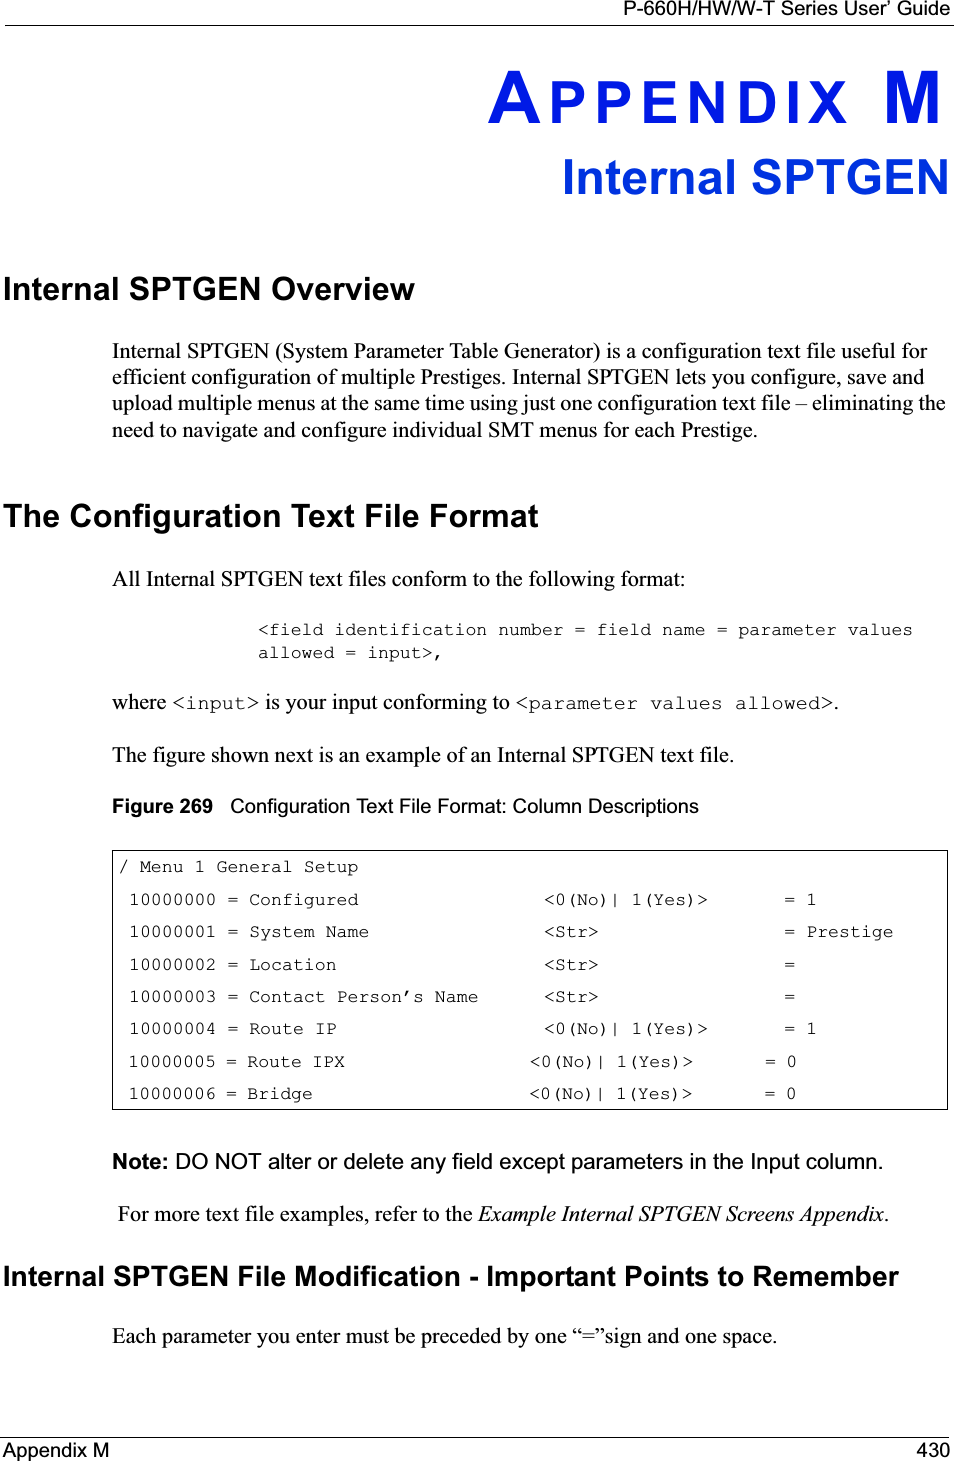 P-660H/HW/W-T Series User’ GuideAppendix M 430APPENDIX MInternal SPTGENInternal SPTGEN OverviewInternal SPTGEN (System Parameter Table Generator) is a configuration text file useful for efficient configuration of multiple Prestiges. Internal SPTGEN lets you configure, save and upload multiple menus at the same time using just one configuration text file – eliminating the need to navigate and configure individual SMT menus for each Prestige. The Configuration Text File FormatAll Internal SPTGEN text files conform to the following format:&lt;field identification number = field name = parameter values allowed = input&gt;,where &lt;input&gt; is your input conforming to &lt;parameter values allowed&gt;.The figure shown next is an example of an Internal SPTGEN text file.Figure 269   Configuration Text File Format: Column DescriptionsNote: DO NOT alter or delete any field except parameters in the Input column.  For more text file examples, refer to the Example Internal SPTGEN Screens Appendix.Internal SPTGEN File Modification - Important Points to RememberEach parameter you enter must be preceded by one “=”sign and one space./ Menu 1 General Setup     10000000 = Configured                 &lt;0(No)| 1(Yes)&gt;       = 1     10000001 = System Name                &lt;Str&gt;                 = Prestige 10000002 = Location                   &lt;Str&gt;                 =      10000003 = Contact Person’s Name      &lt;Str&gt;                 =      10000004 = Route IP                   &lt;0(No)| 1(Yes)&gt;       = 1     10000005 = Route IPX                  &lt;0(No)| 1(Yes)&gt;       = 0               10000006 = Bridge                     &lt;0(No)| 1(Yes)&gt;       = 0              